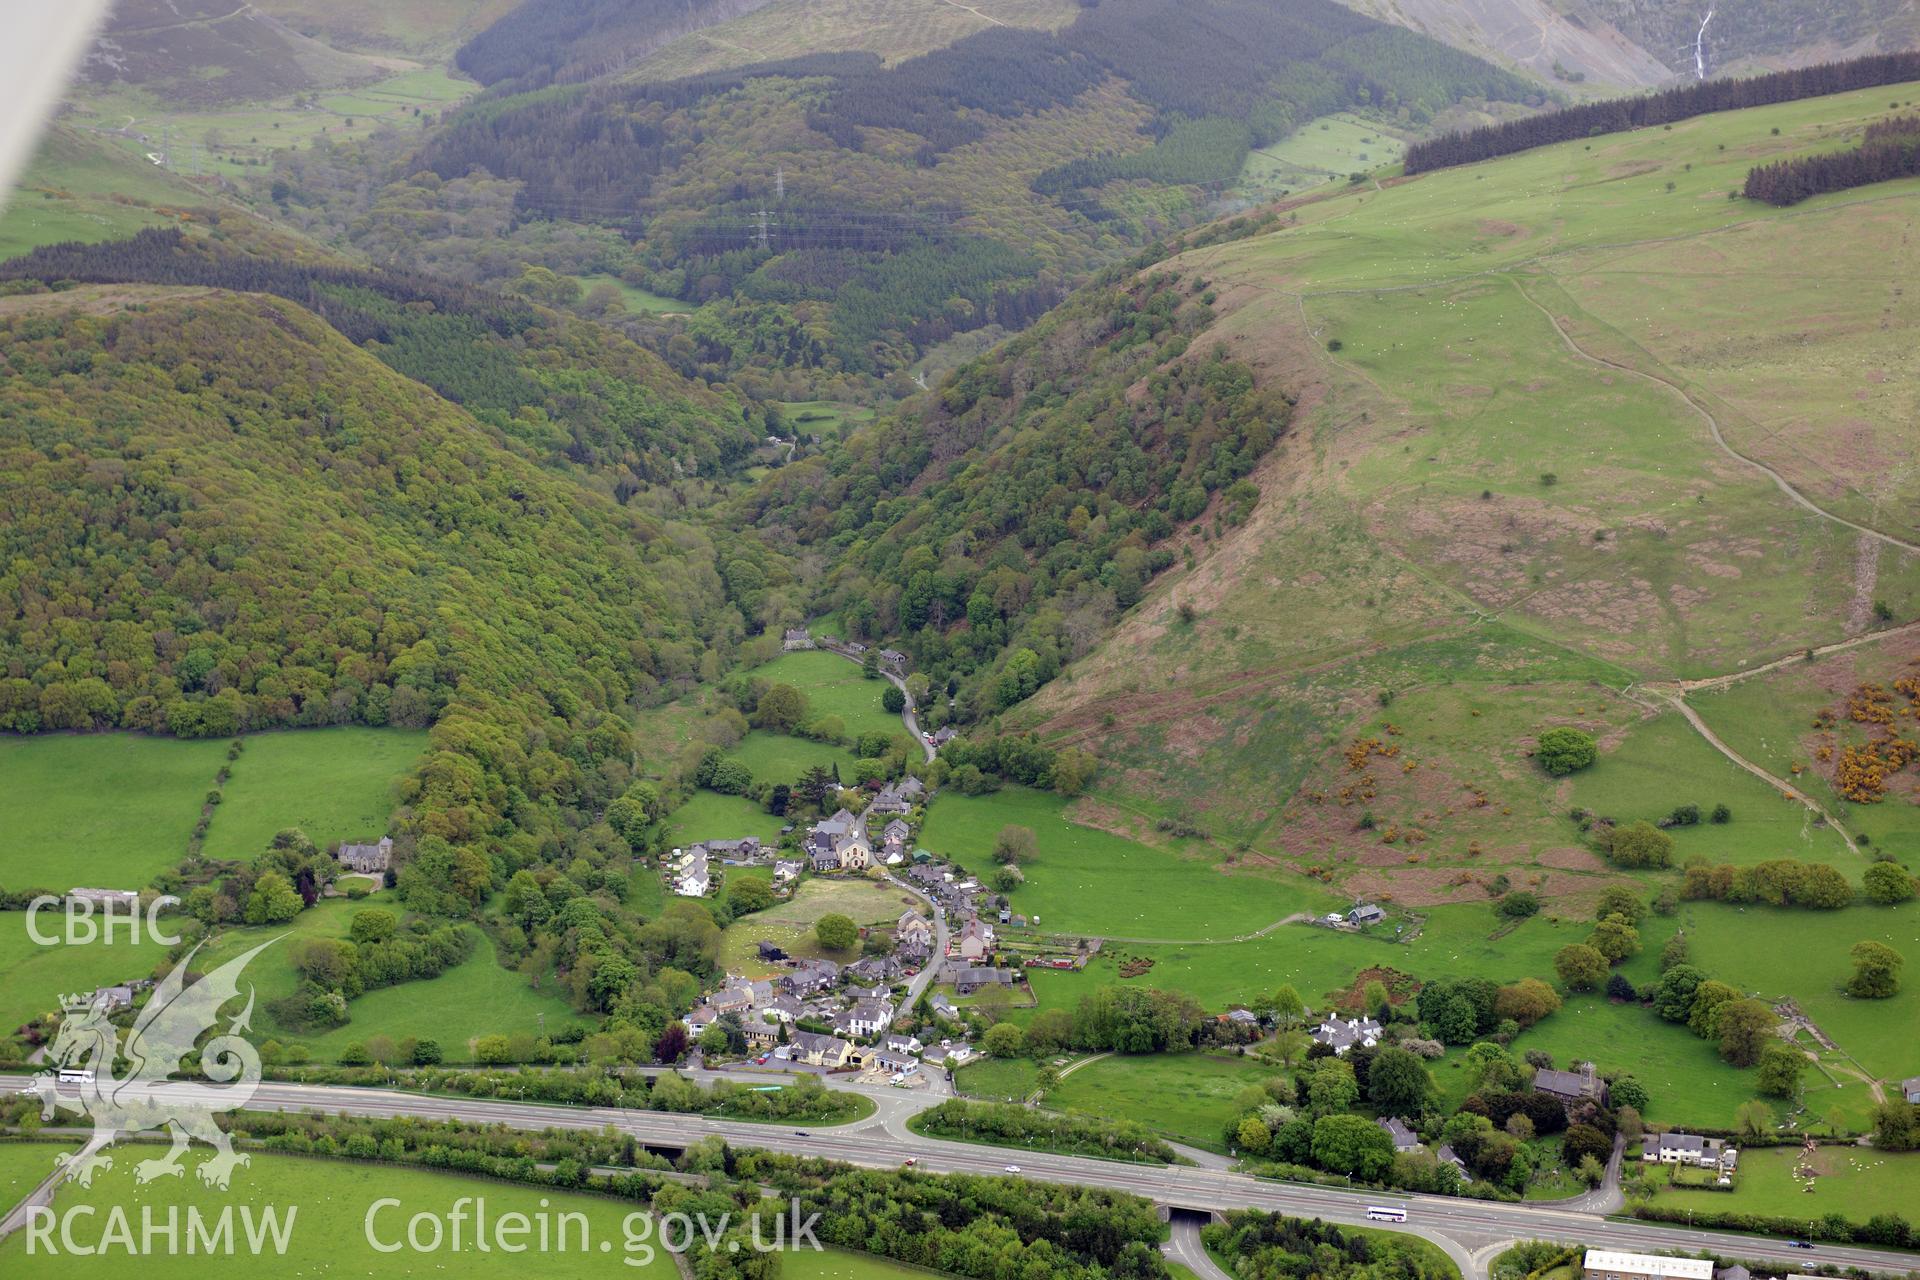 The village of Abergwyngregyn, Aber castle, and the Llys at Abergwyngregyn. Oblique aerial photograph taken during the Royal Commission?s programme of archaeological aerial reconnaissance by Toby Driver on 22nd May 2013.